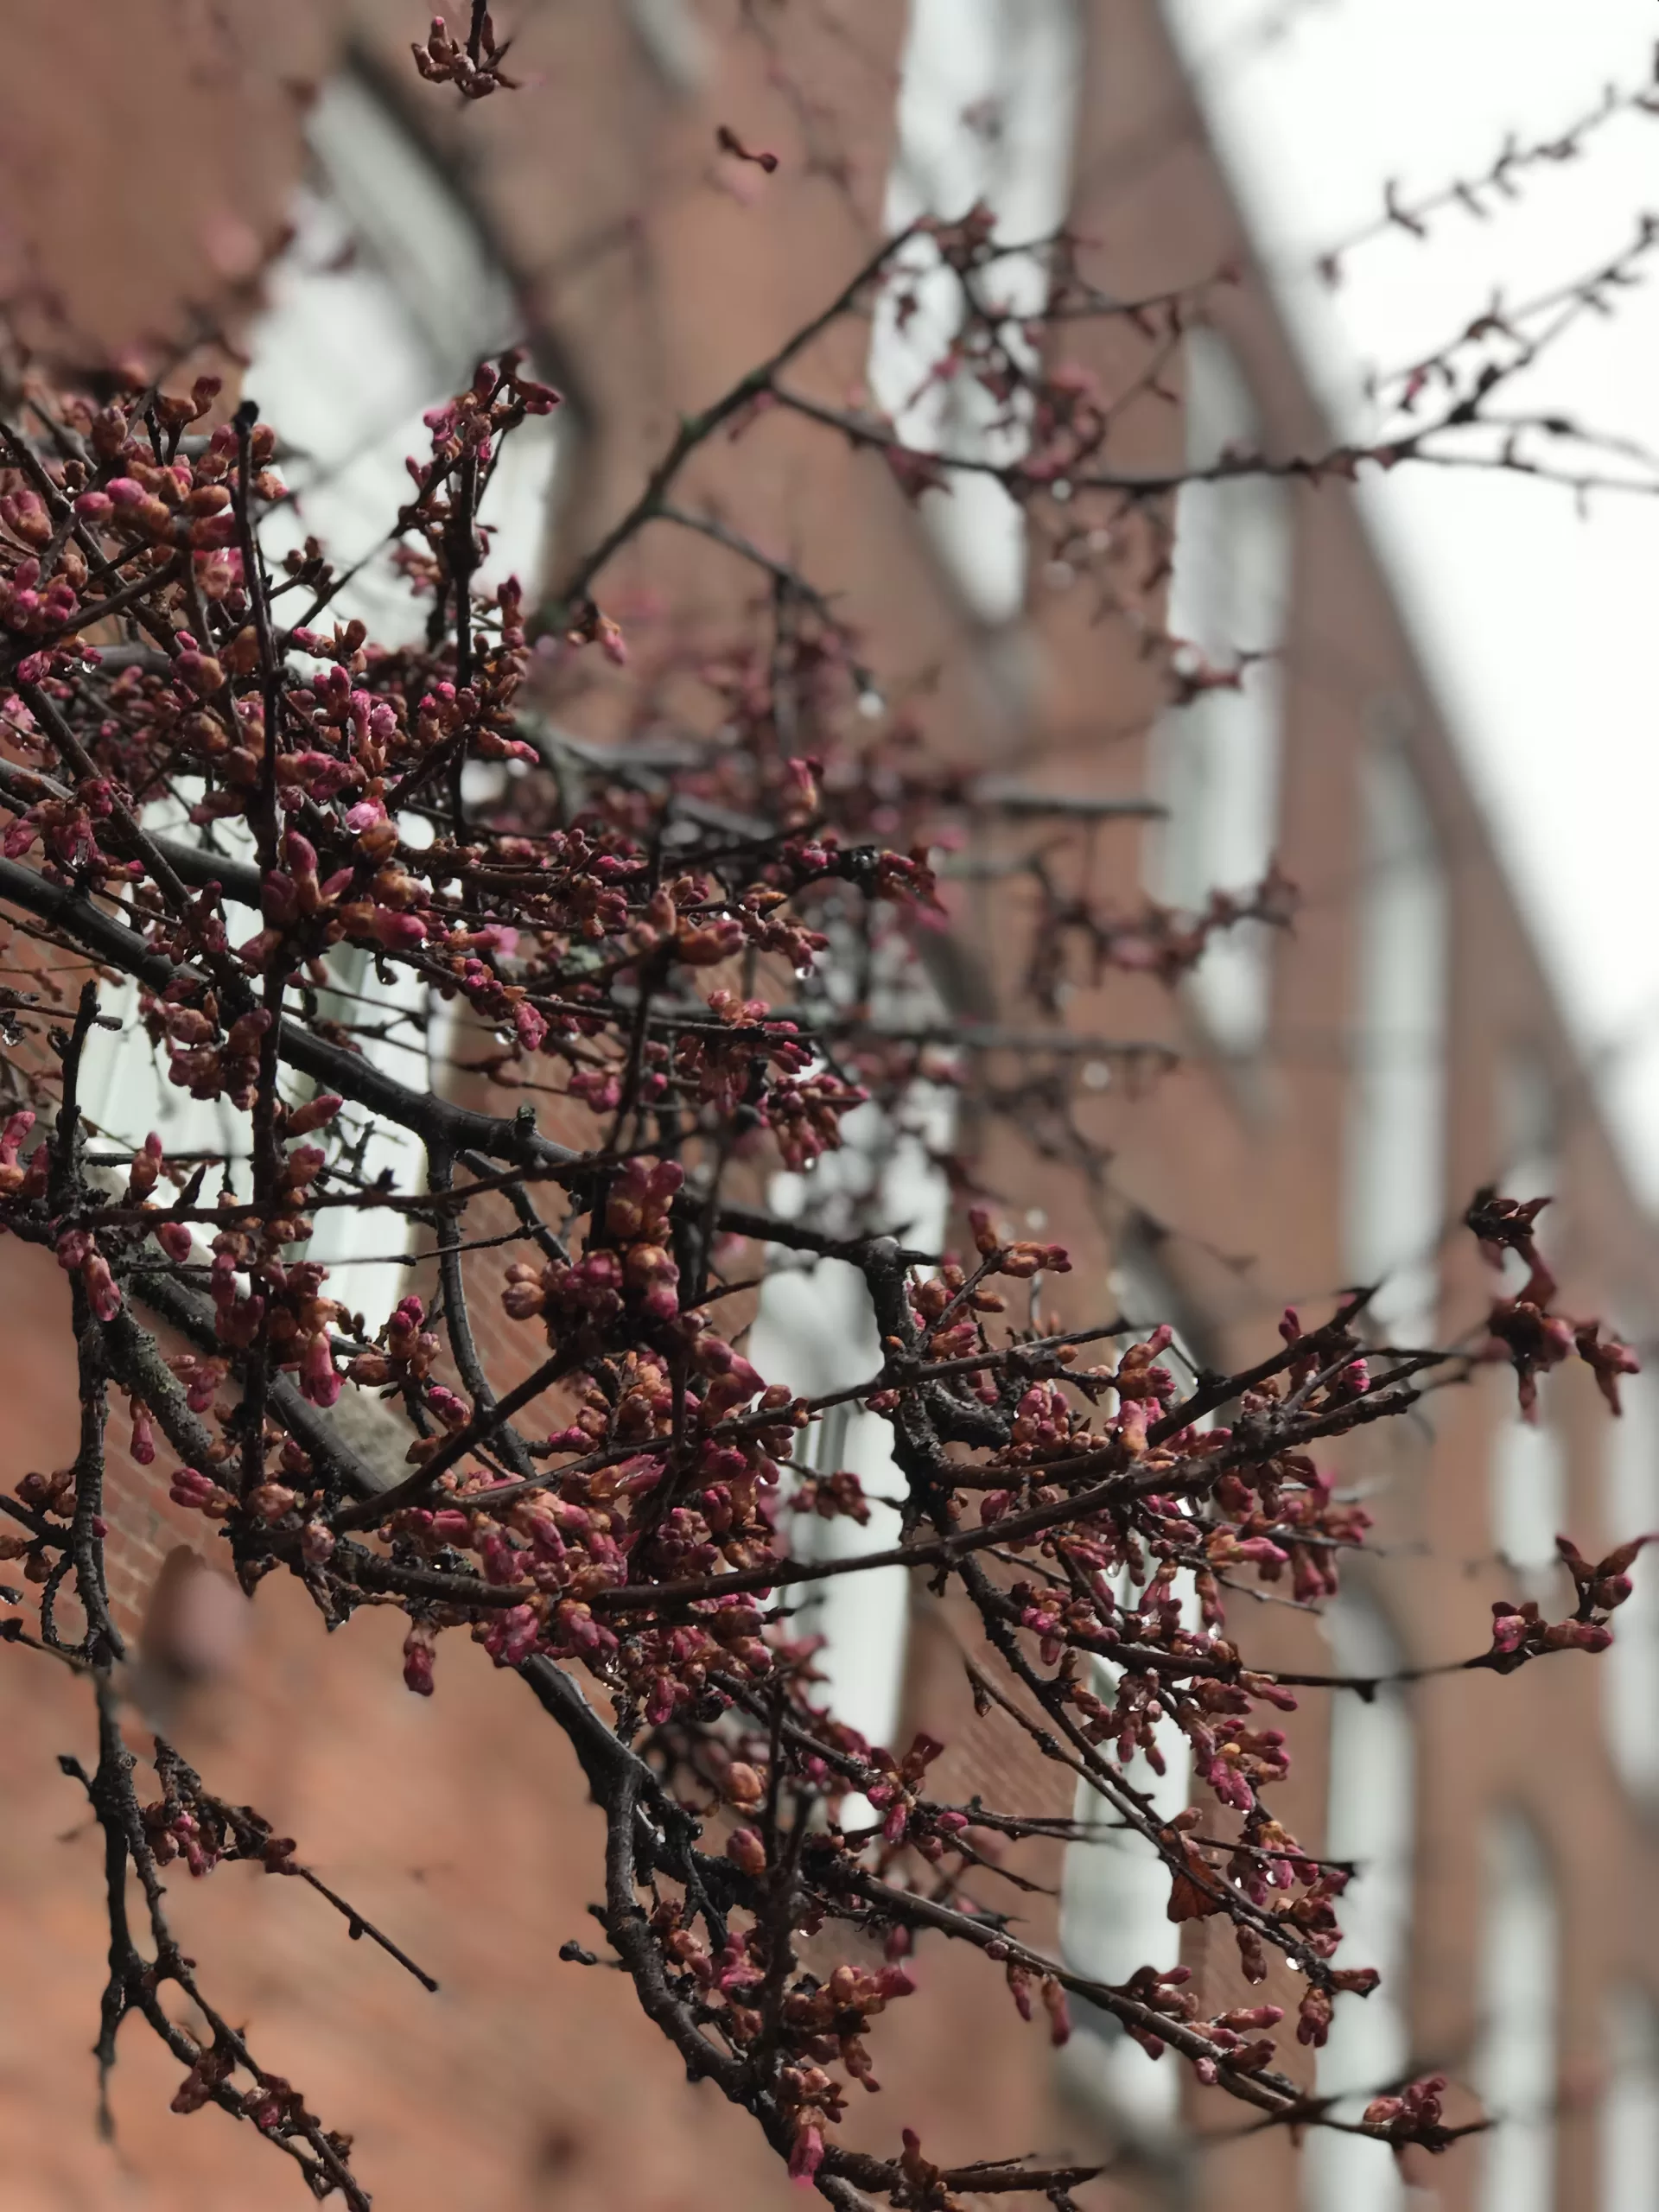 A branch with some unopened, red buds. A brick building is out of focus in the background.